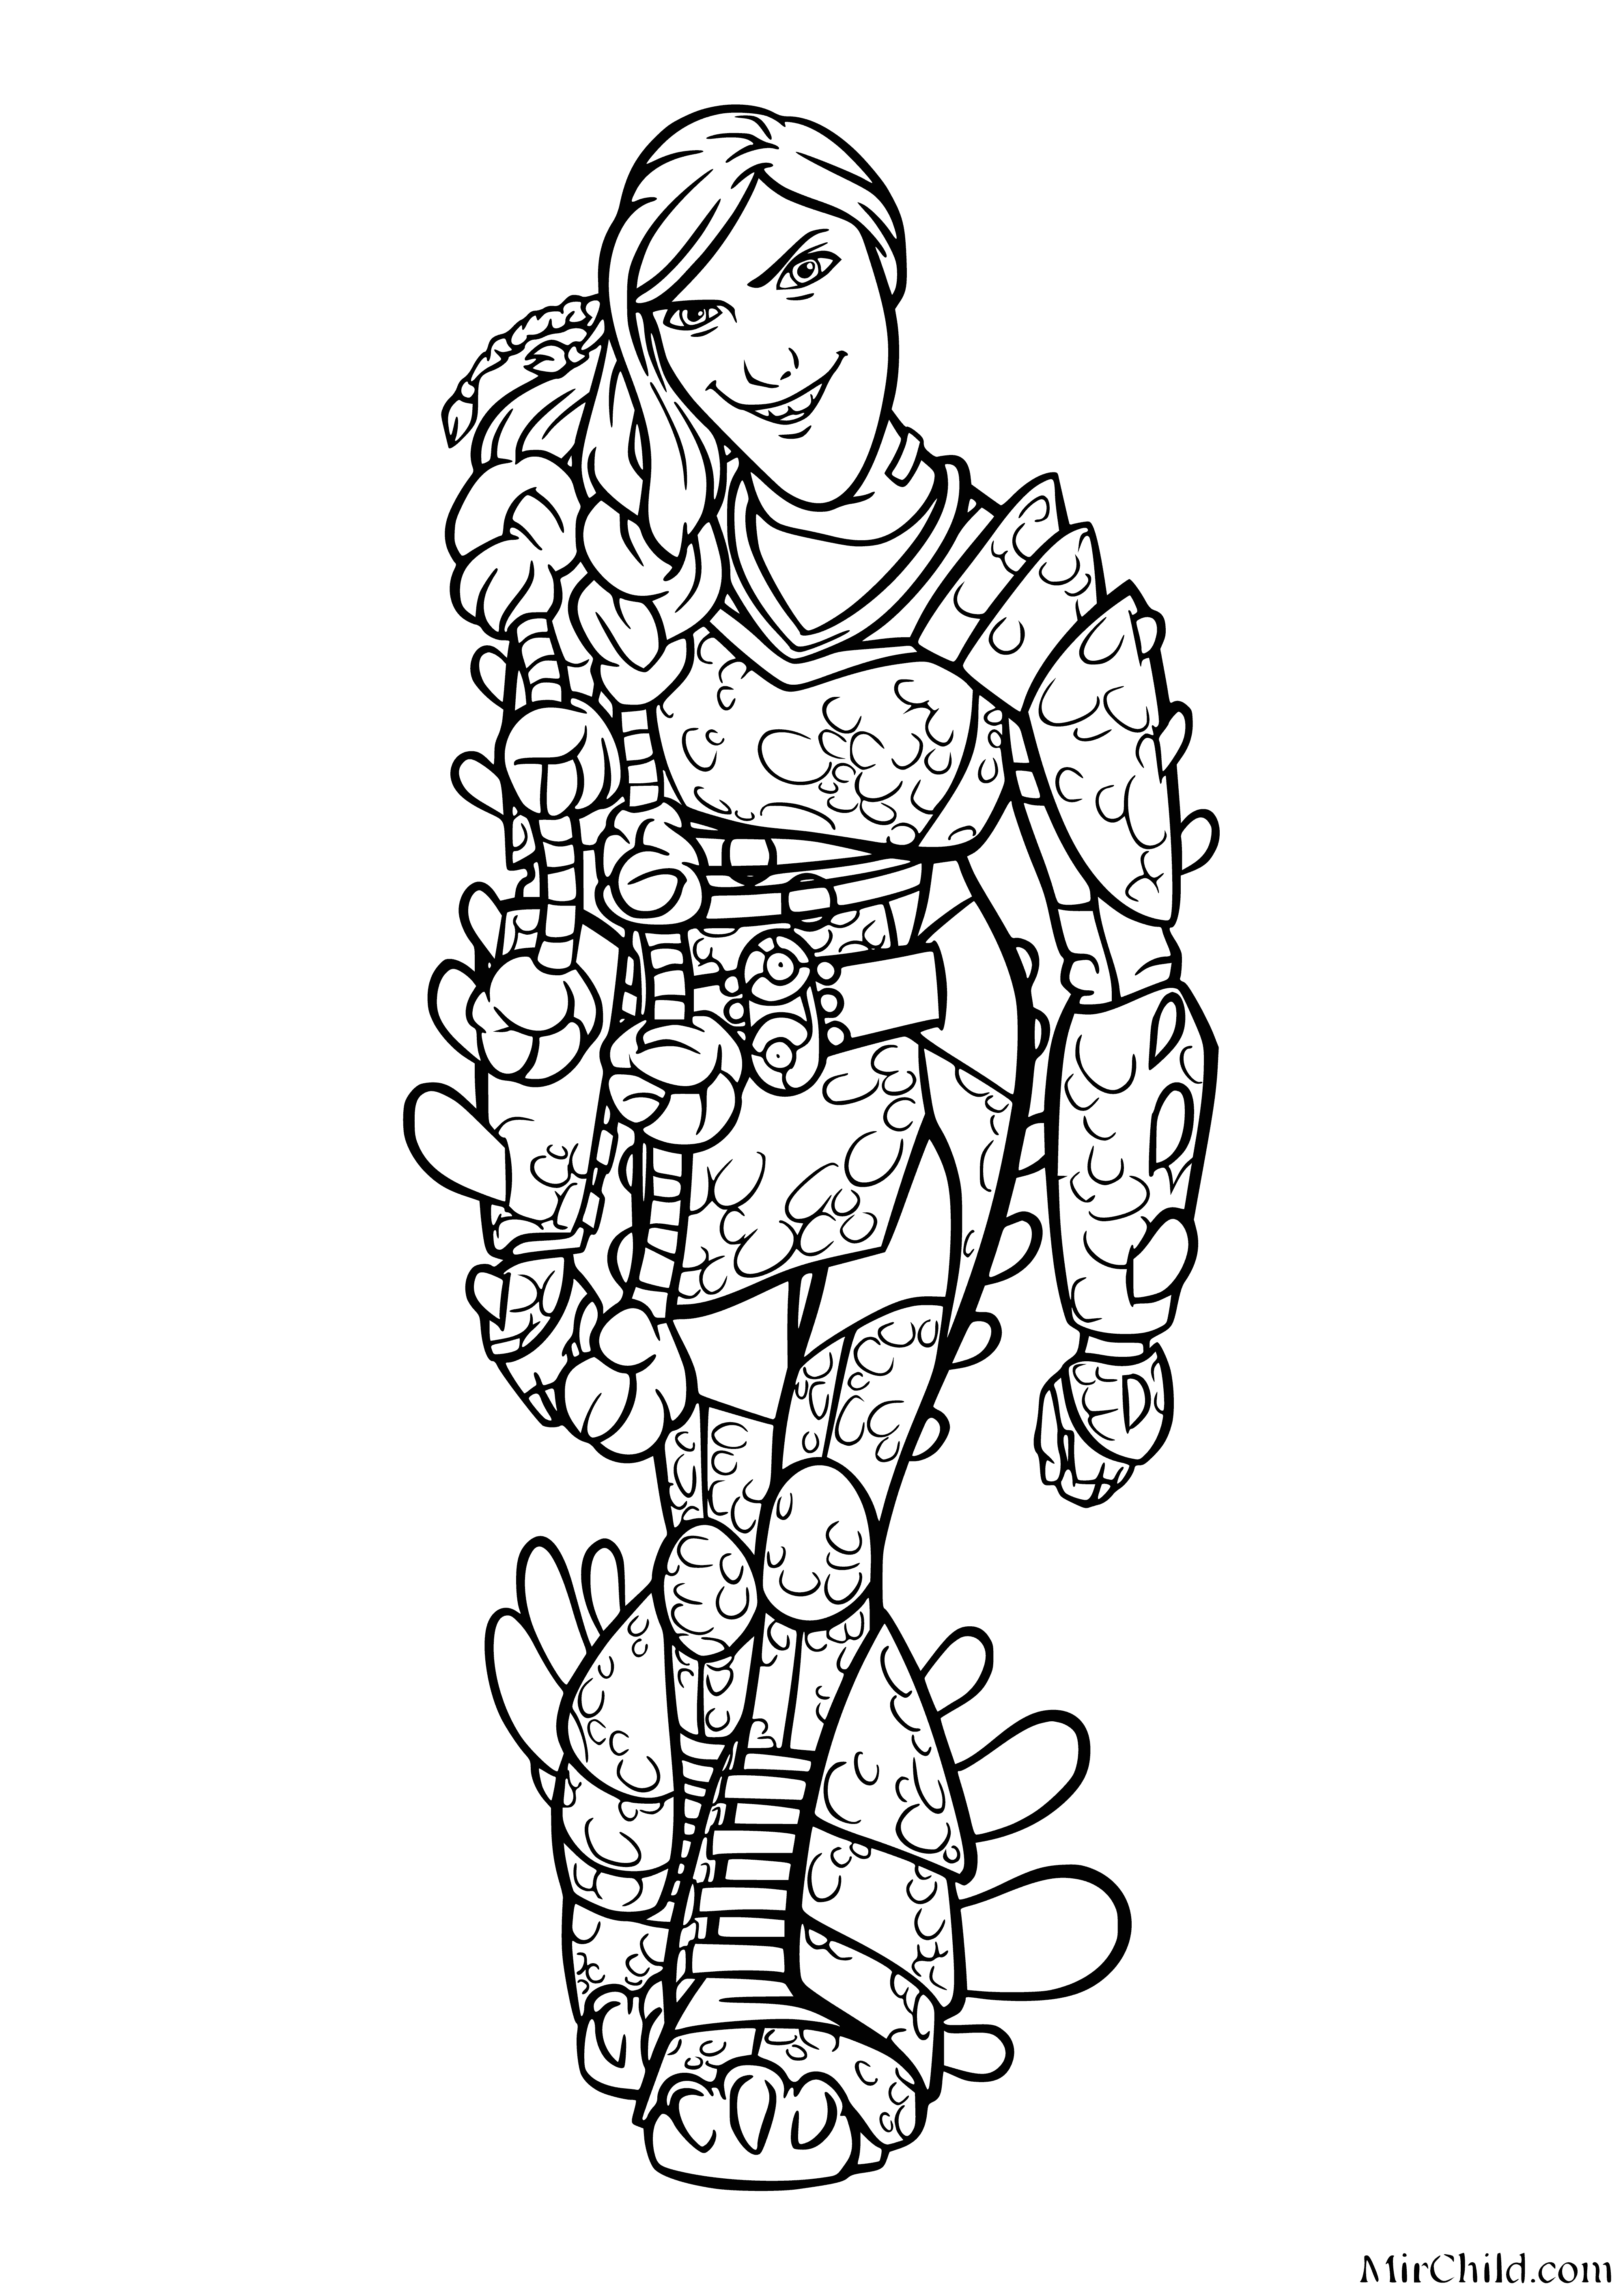 The killer coloring page